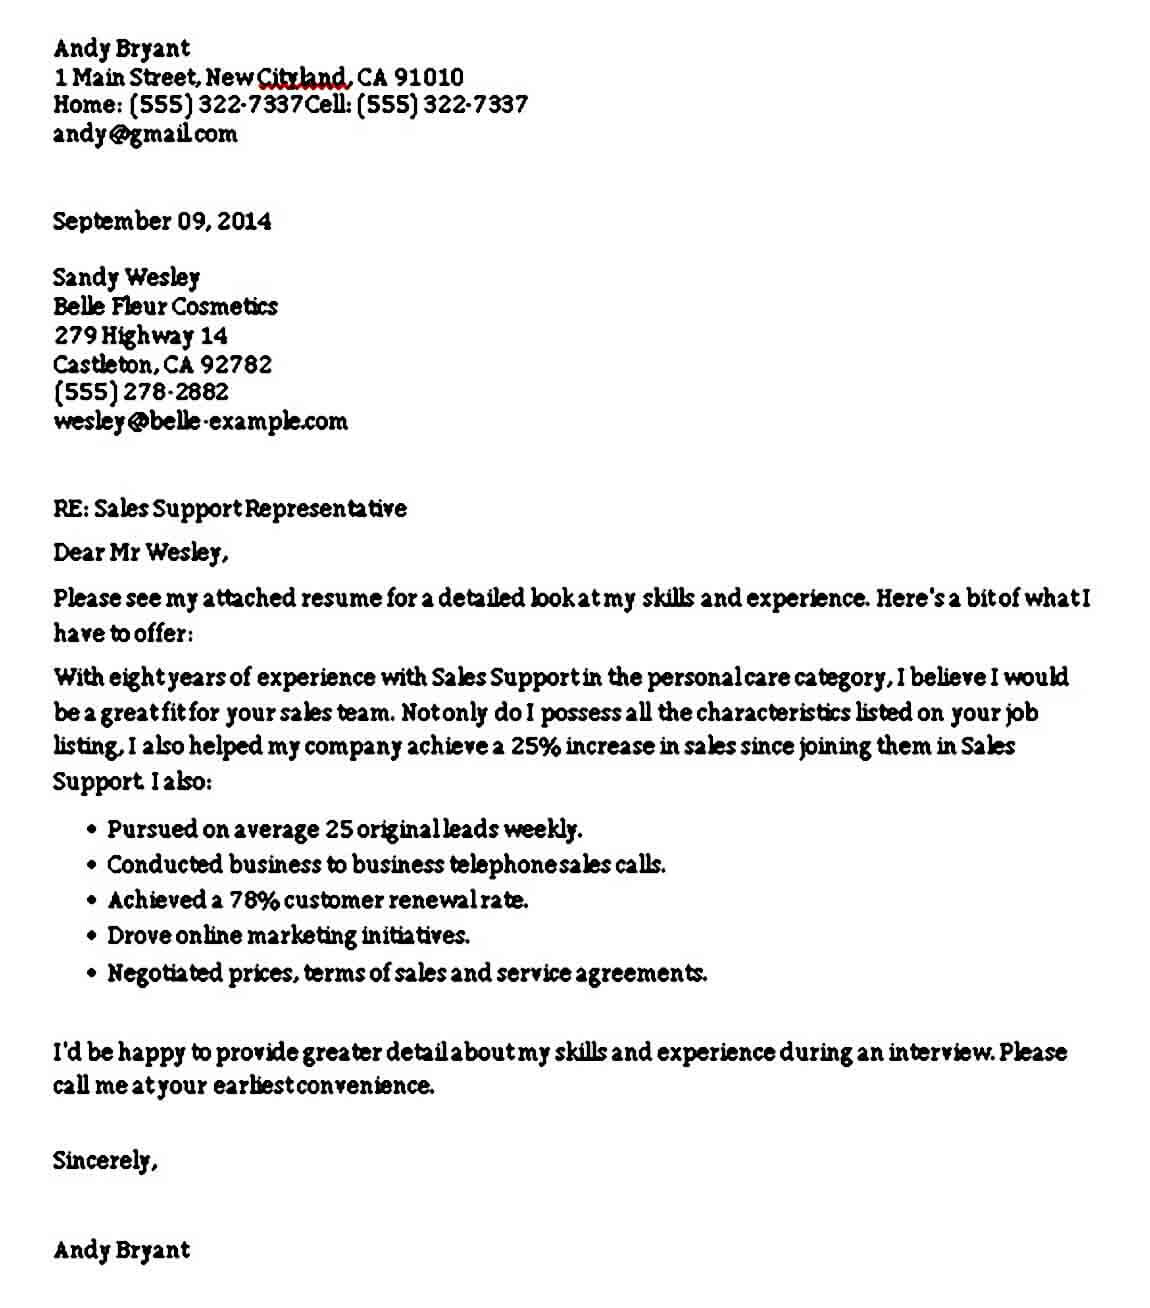 Sales Support Associate Cover Letter Example CEL